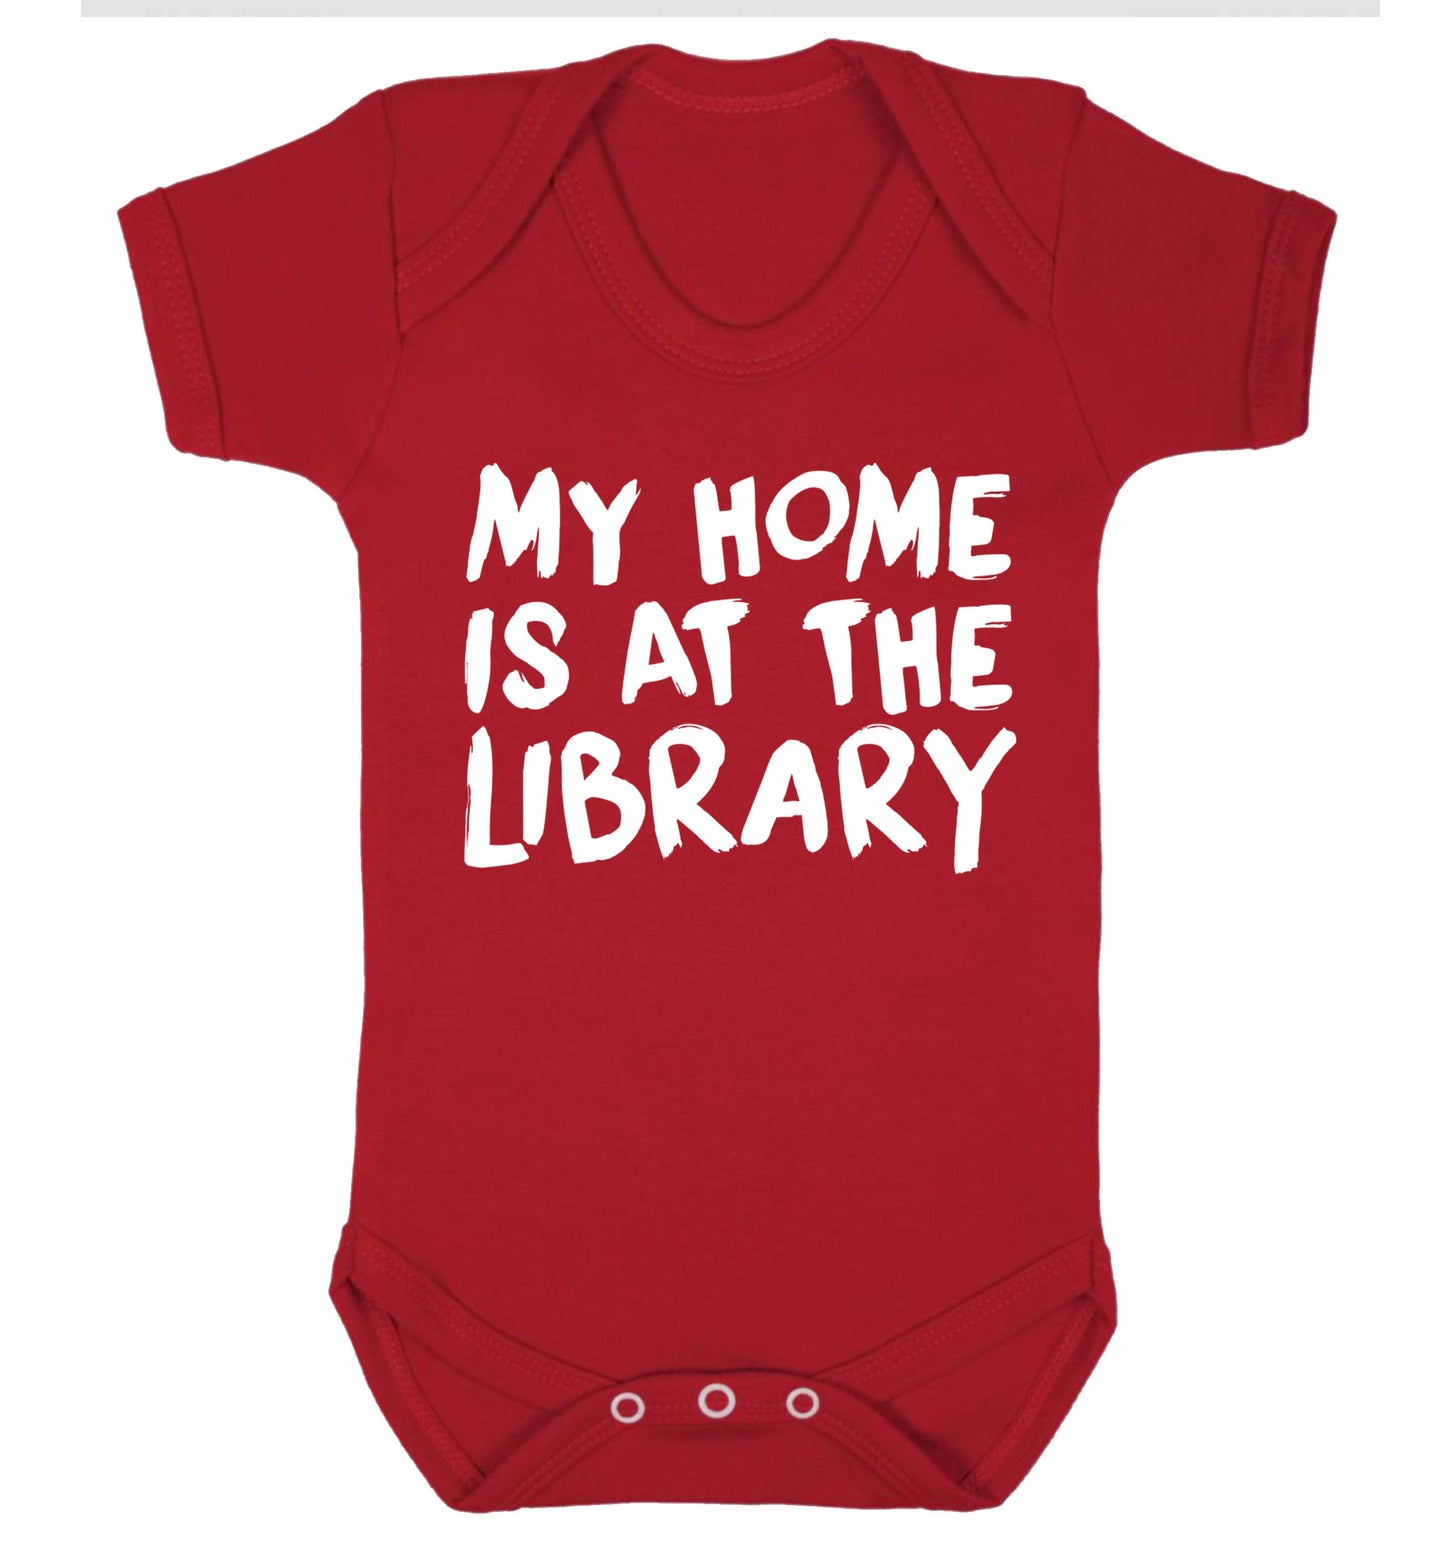 My home is at the library Baby Vest red 18-24 months